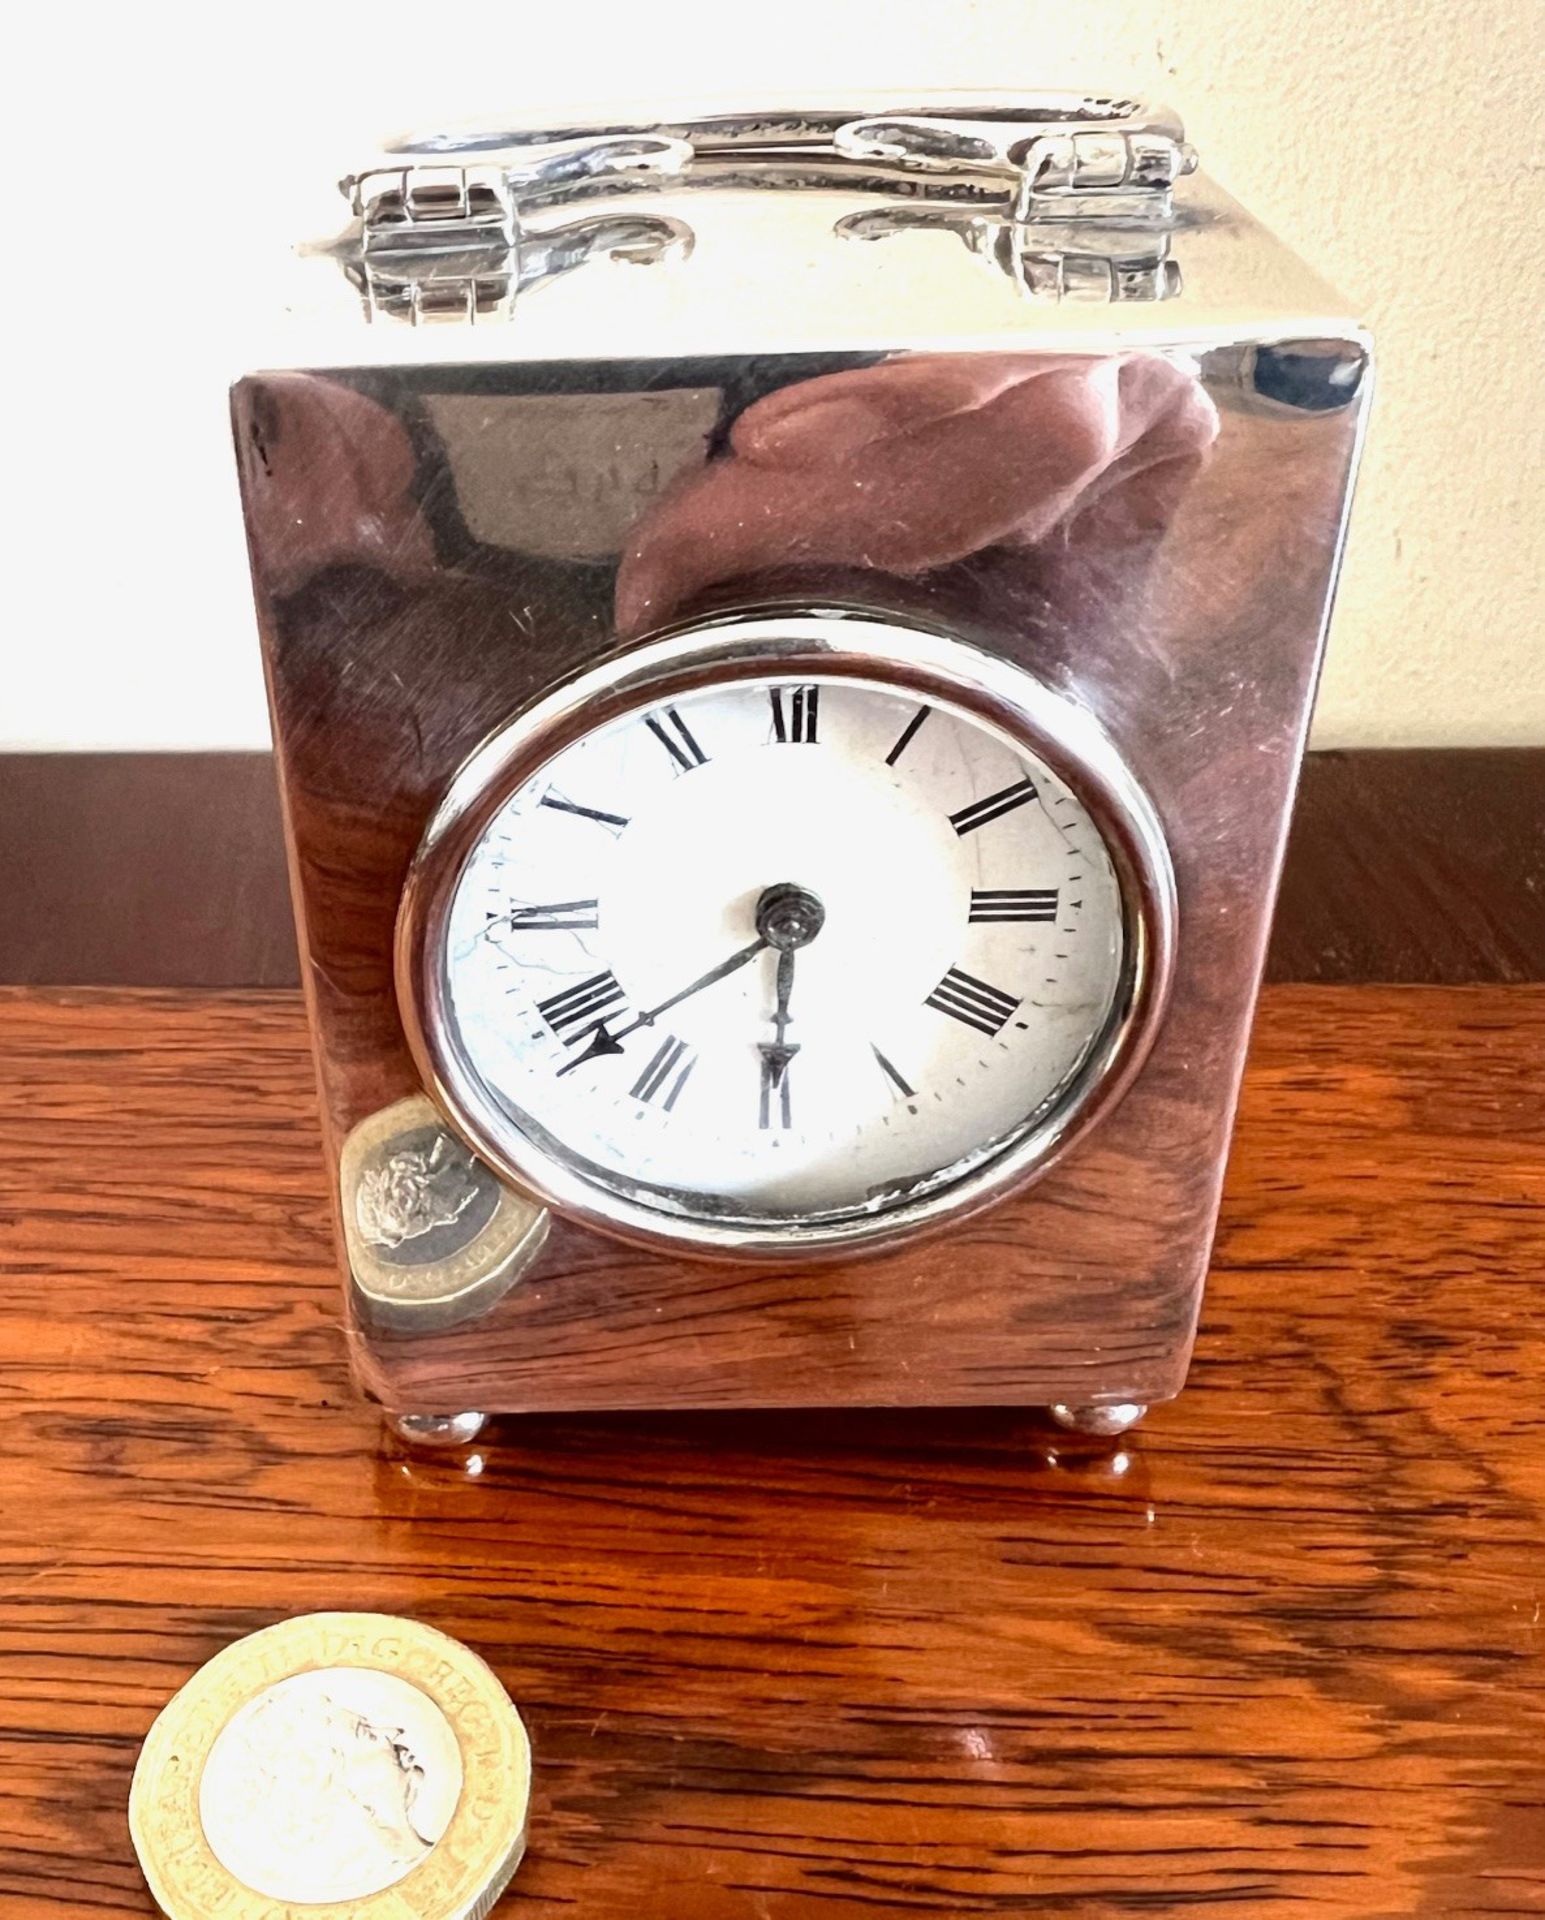 SILVER CASED CLOCK, FRENCH MOVEMENT, LONDON 1914, APPROX 7.5 x 5.5 x 4.25cm NOT WORKING, REPAIR TO